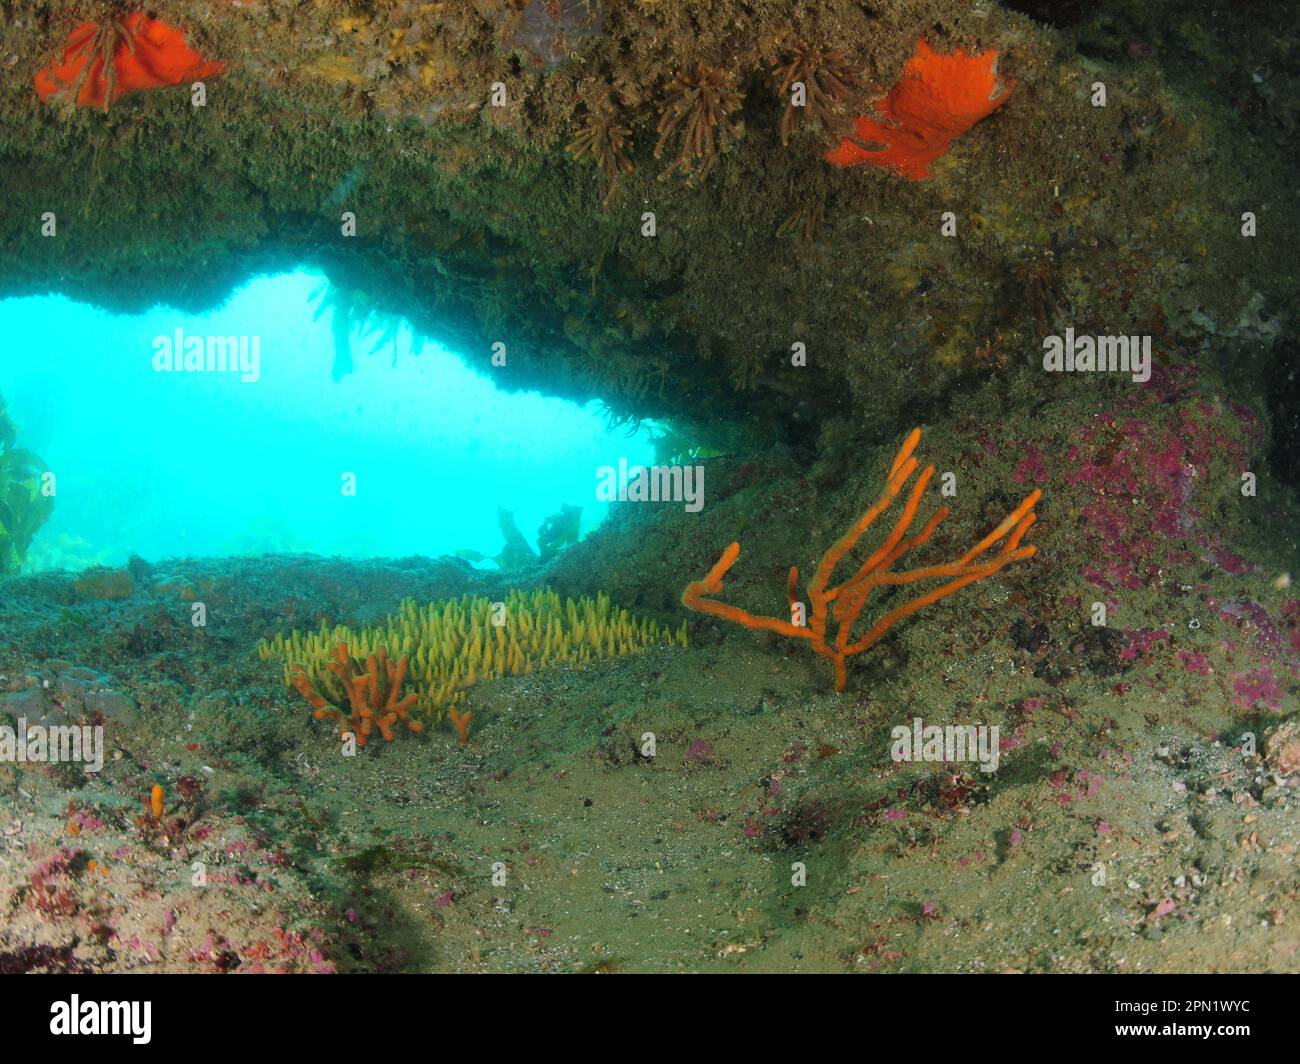 Window in rocky reef creates shade where colourful sponges thrive. Location: Leigh New Zealand Stock Photo